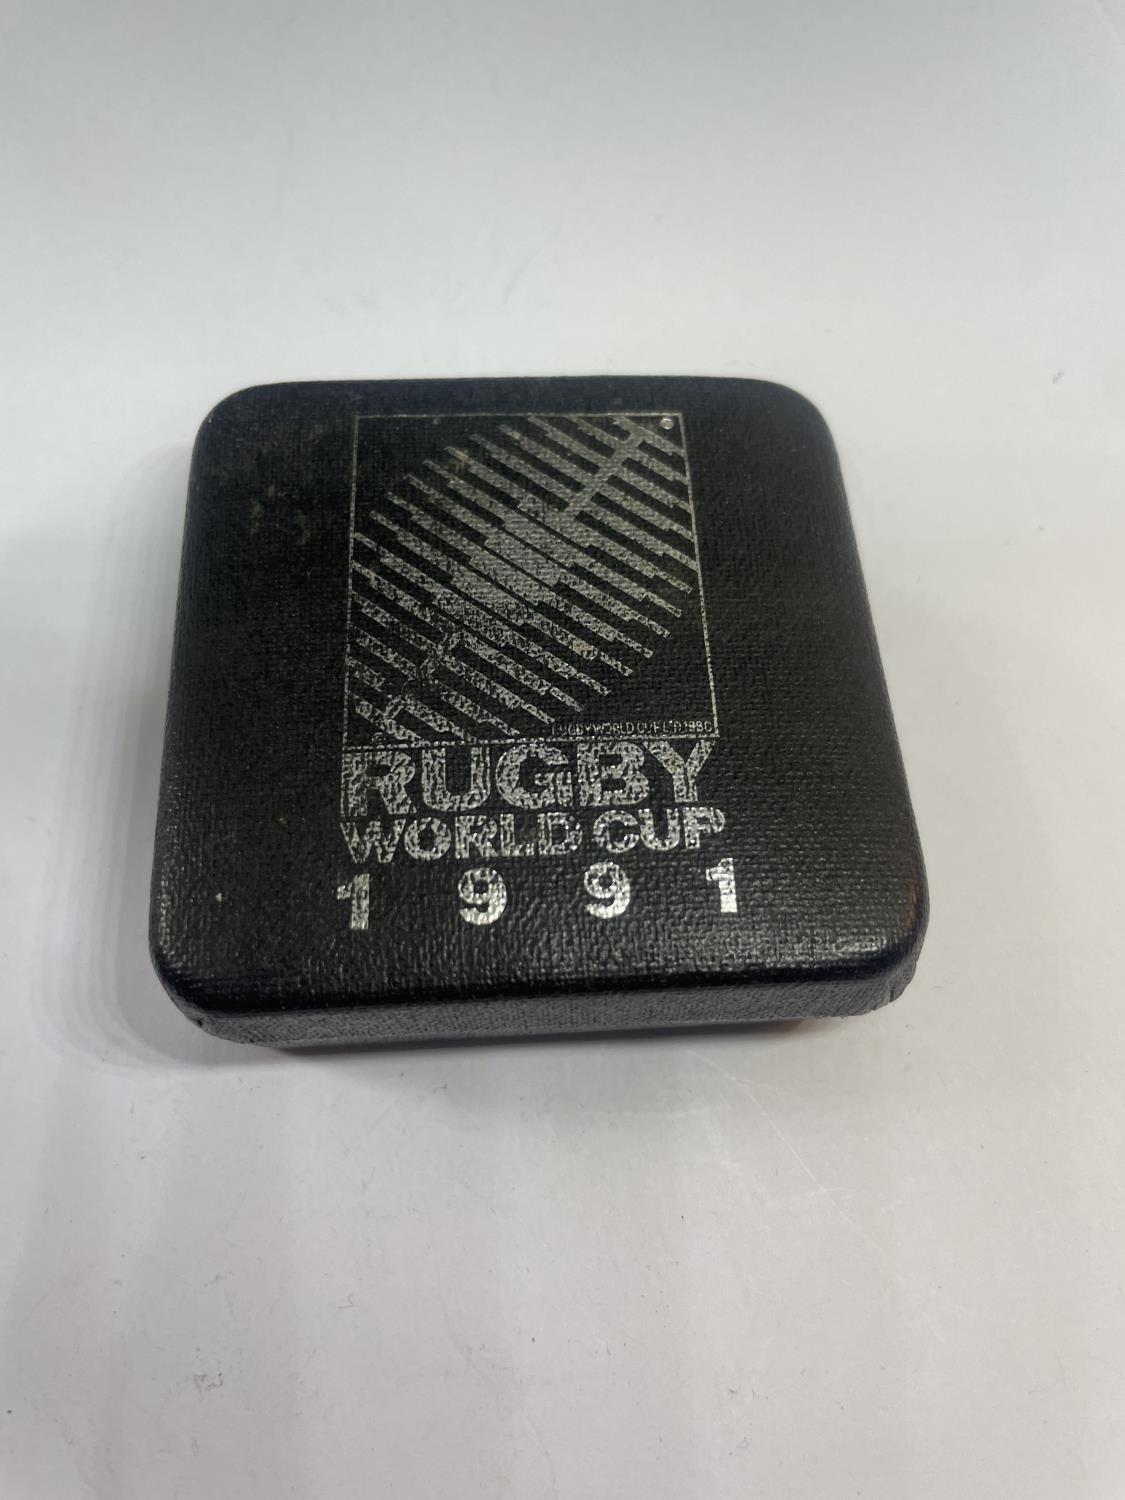 A SILVER 1991 RUGBY WORLD CUP MEDAL IN A PRESENTATION BOX - Image 4 of 4